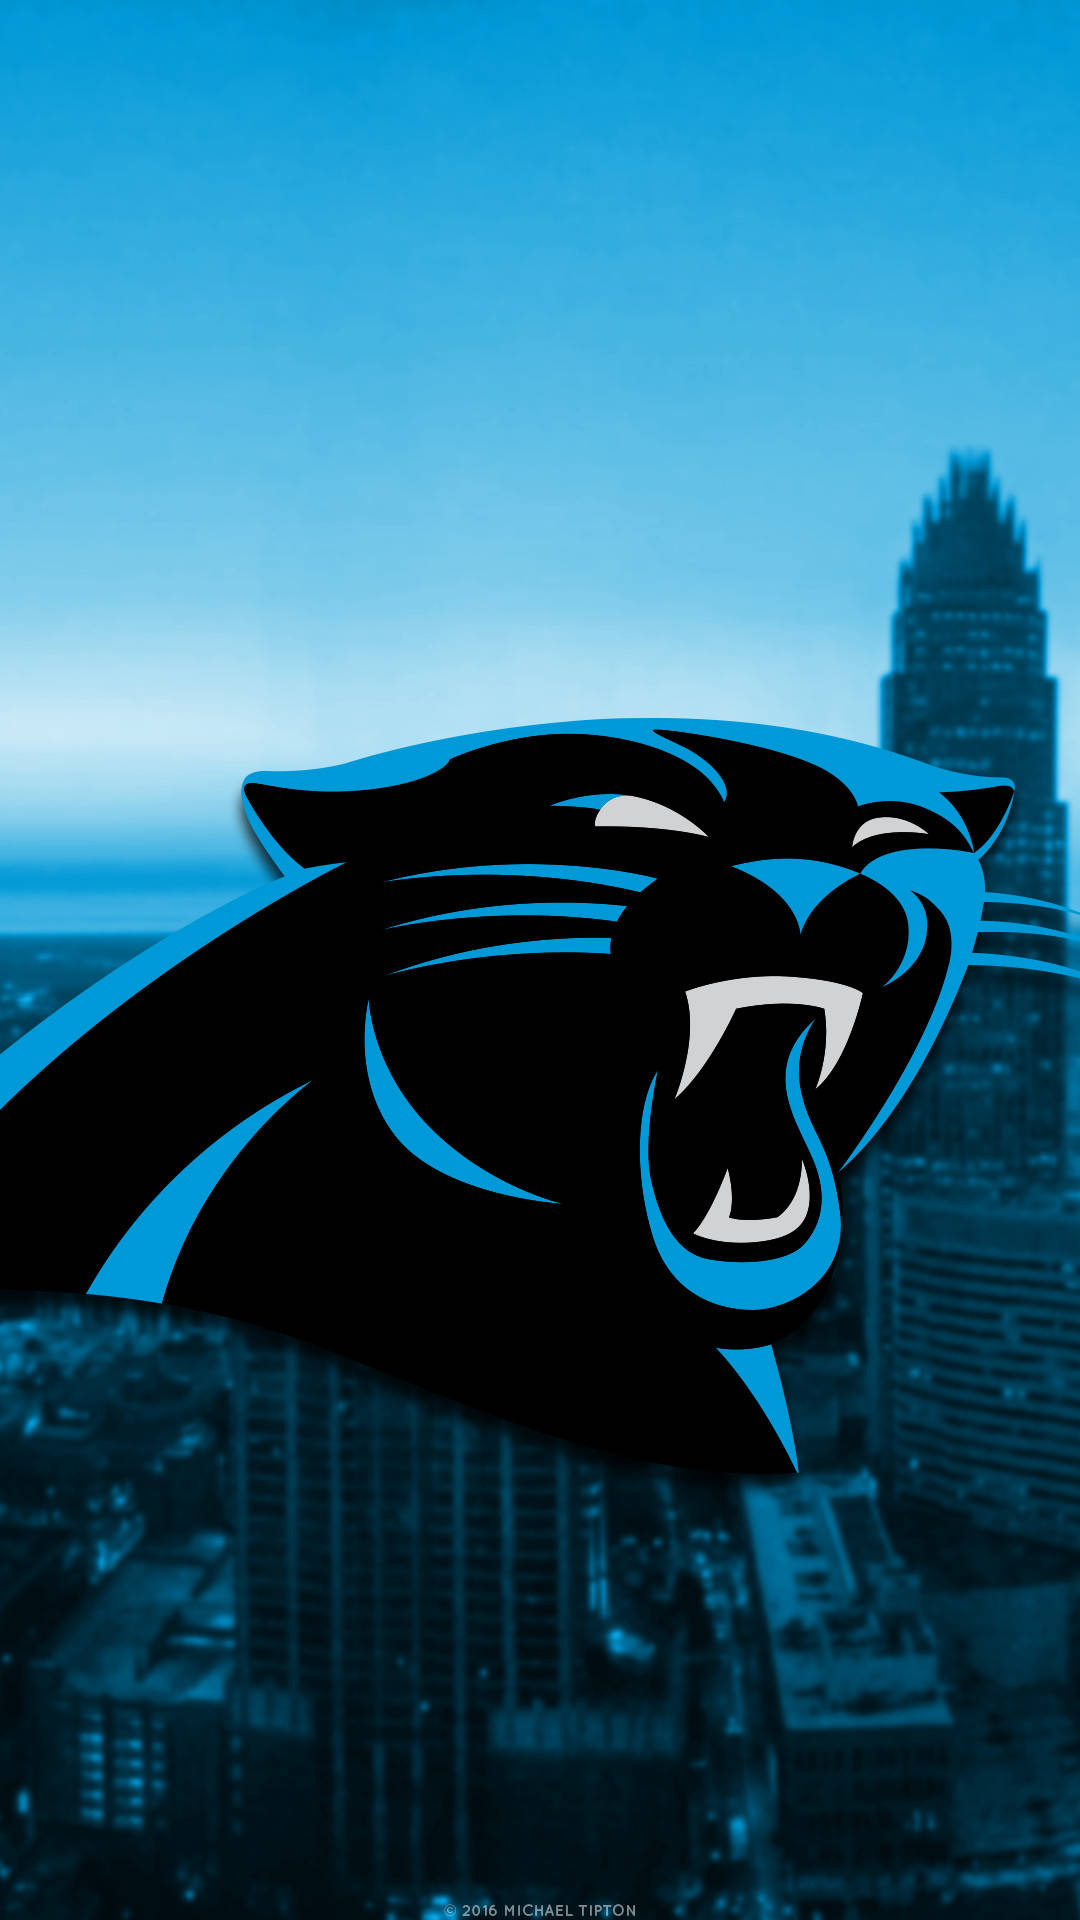 1080x1920 Download Carolina Panthers Logo On City Background Wallpaper | Wallpapers .com